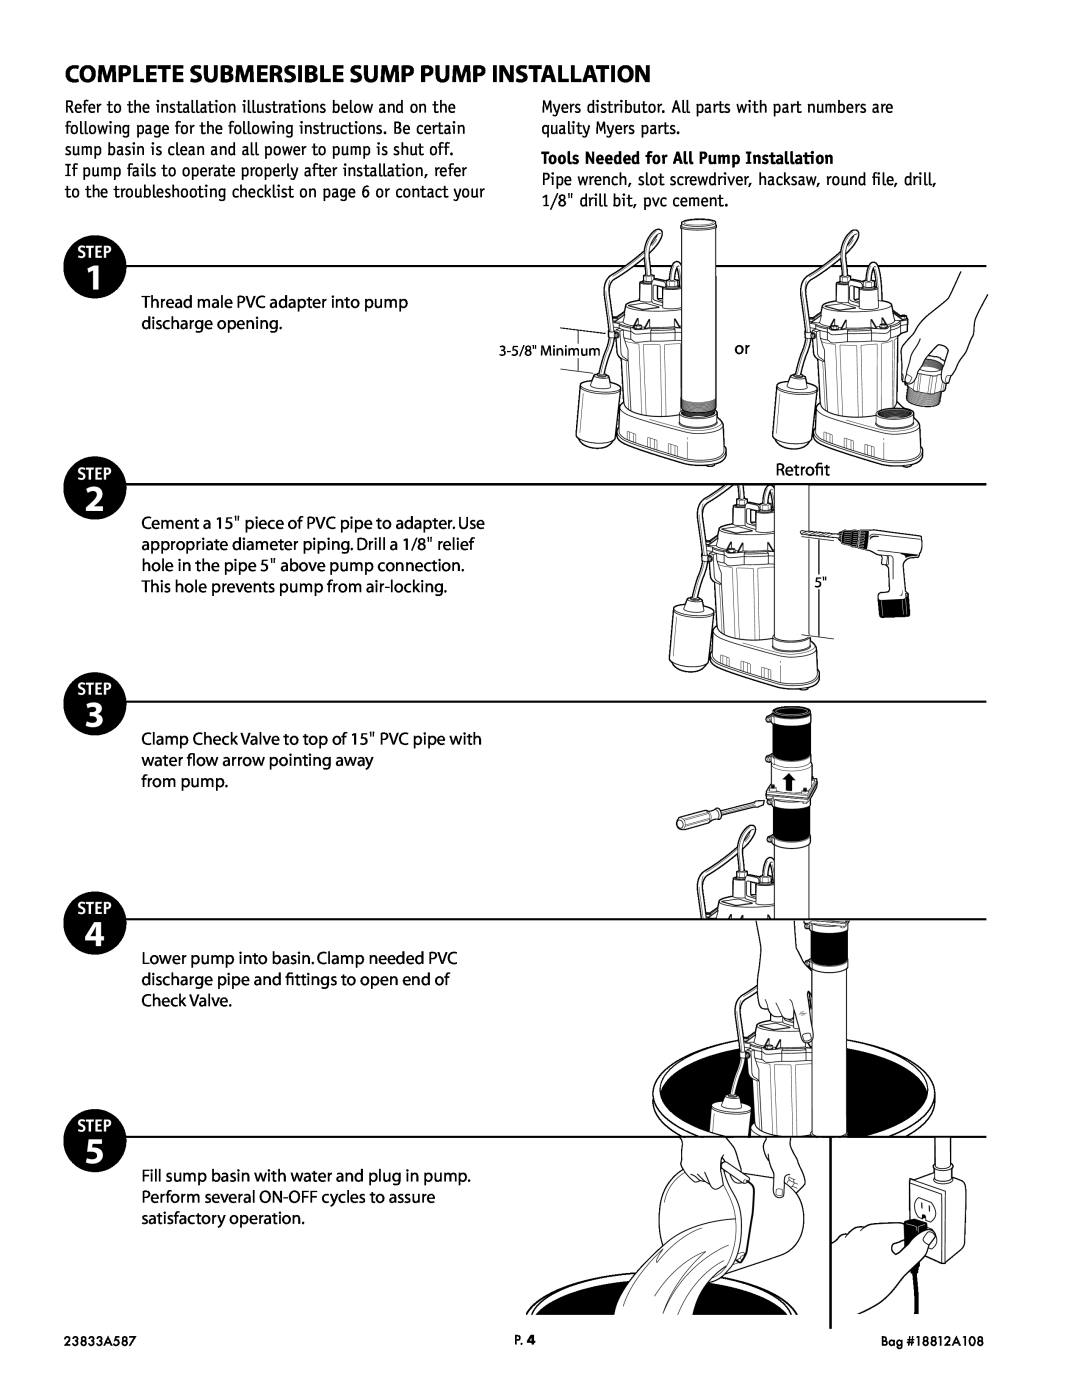 Pentair S33 service manual Complete Submersible Sump Pump Installation, Tools Needed for All Pump Installation, Step 